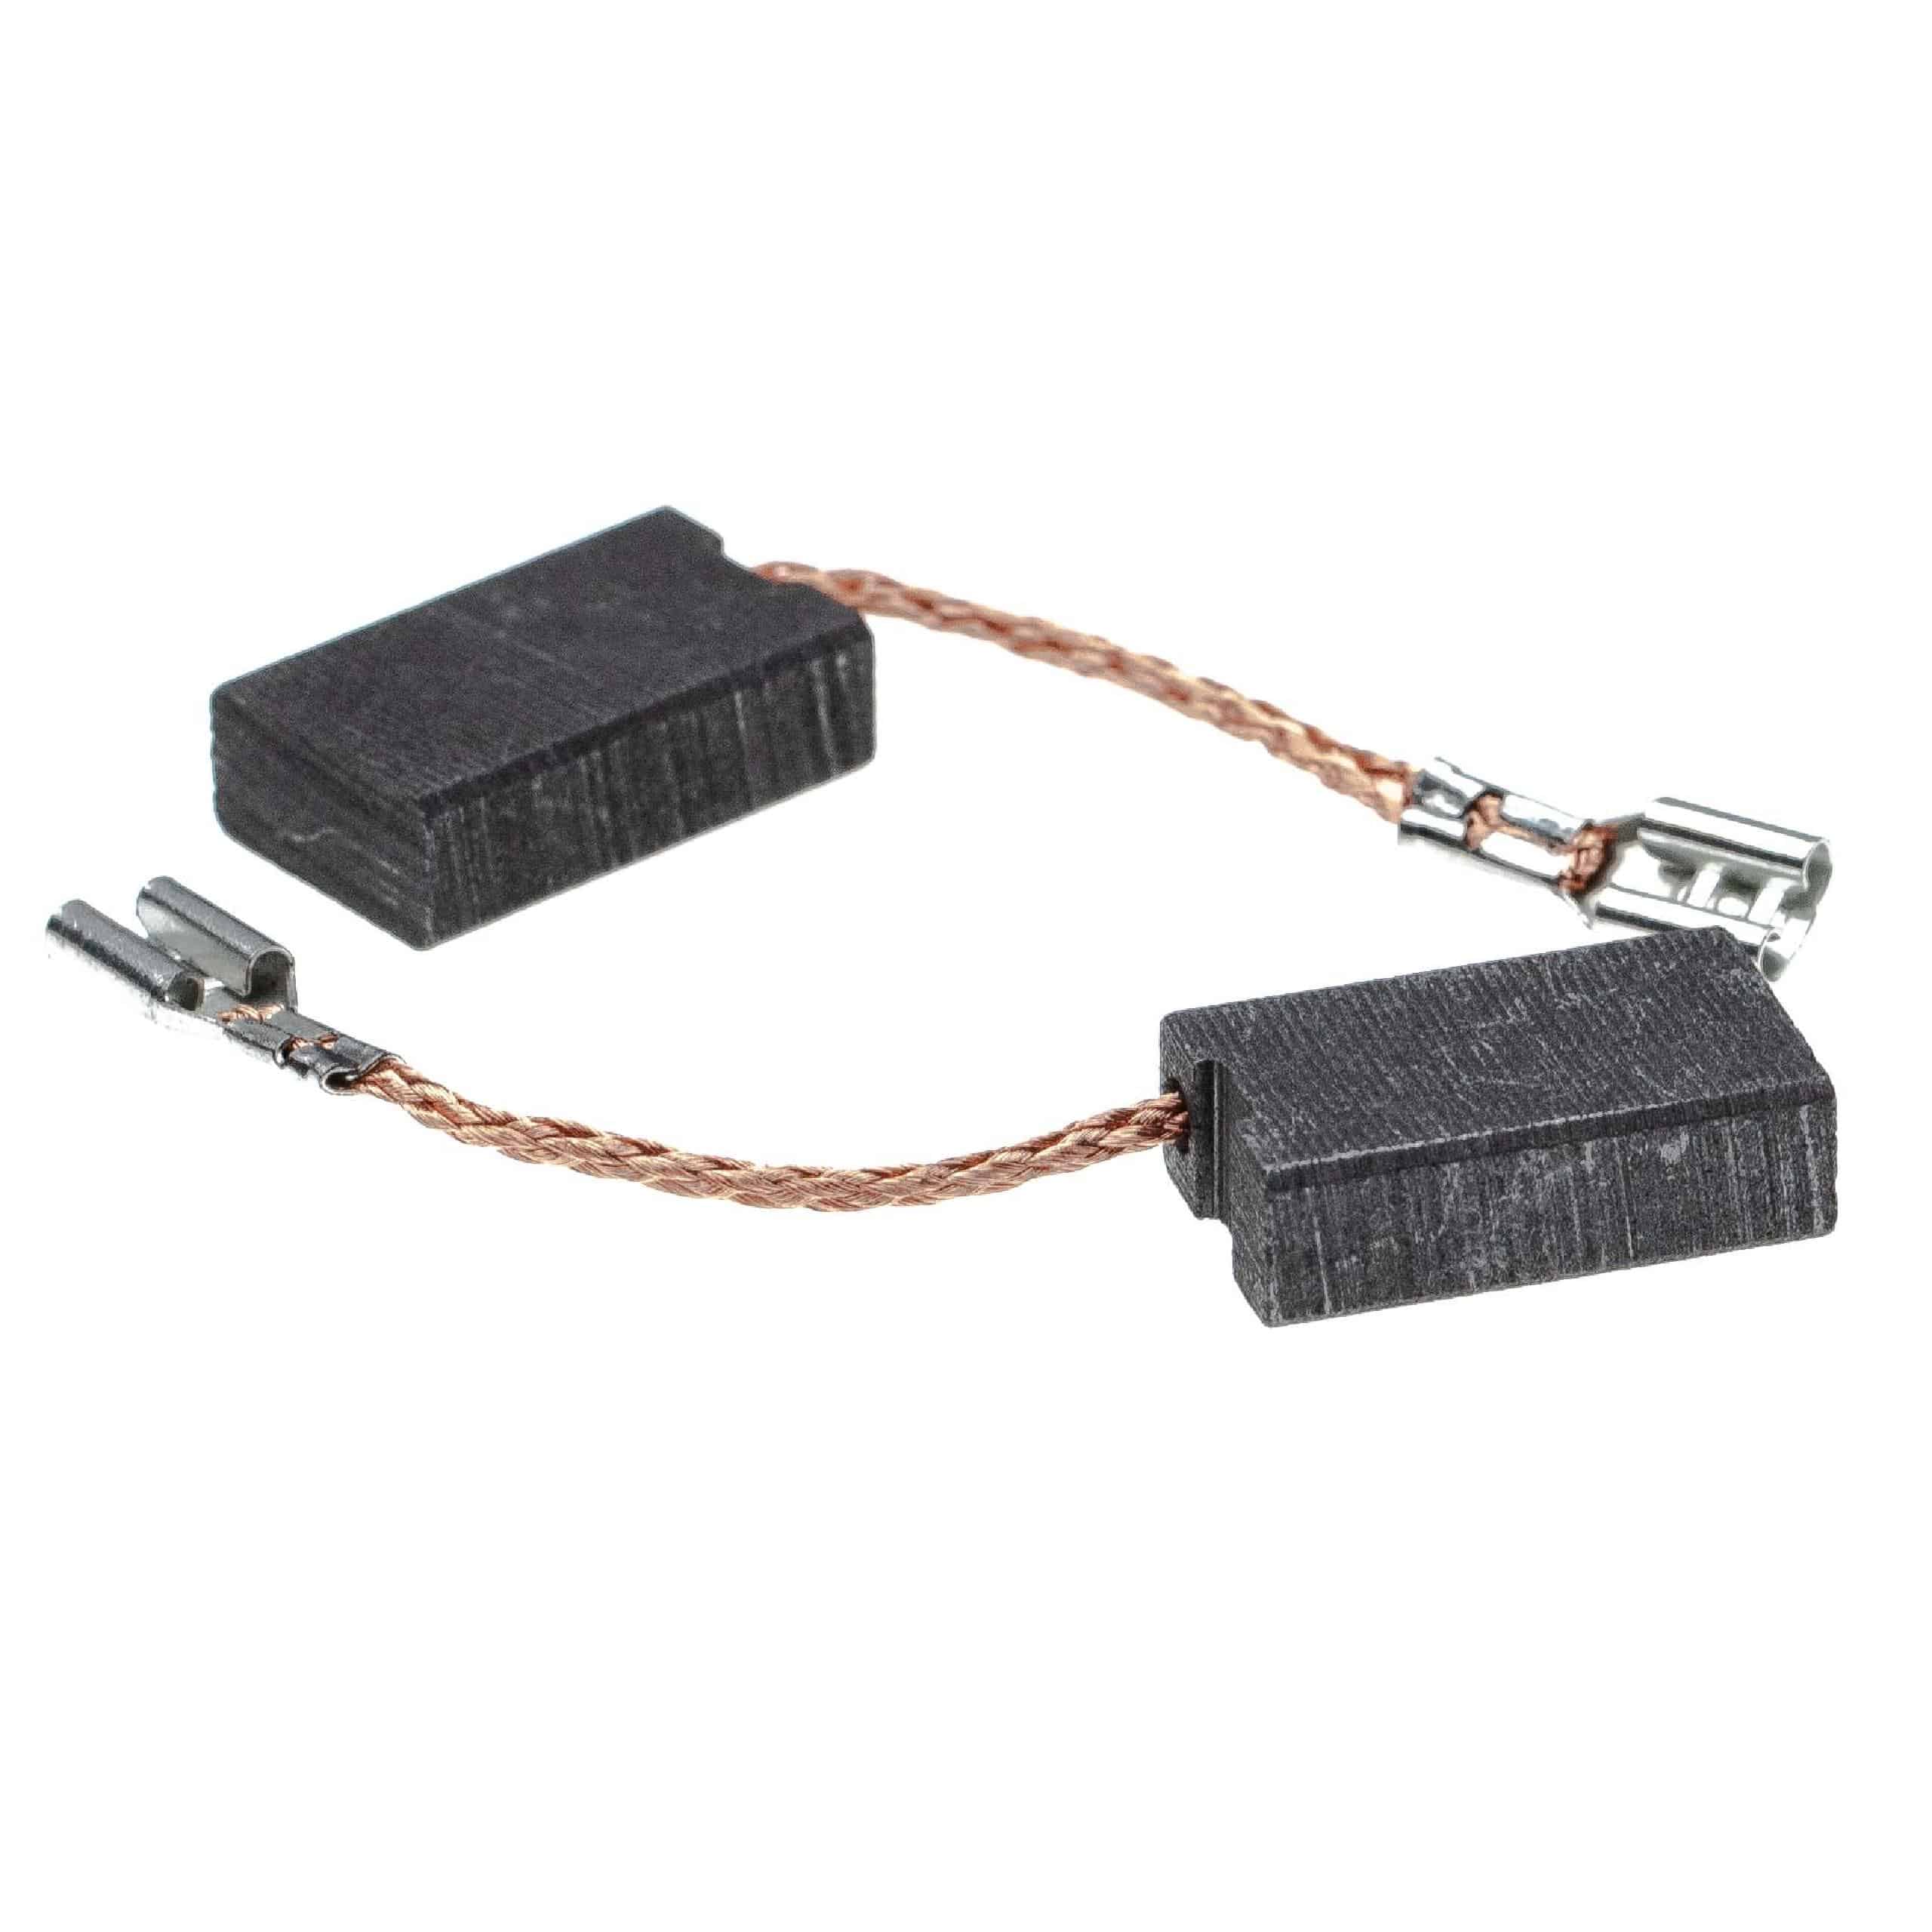 2x Carbon Brush as Replacement for AEG 259495 Electric Power Tools, 20 x 12.5 x 6.25mm